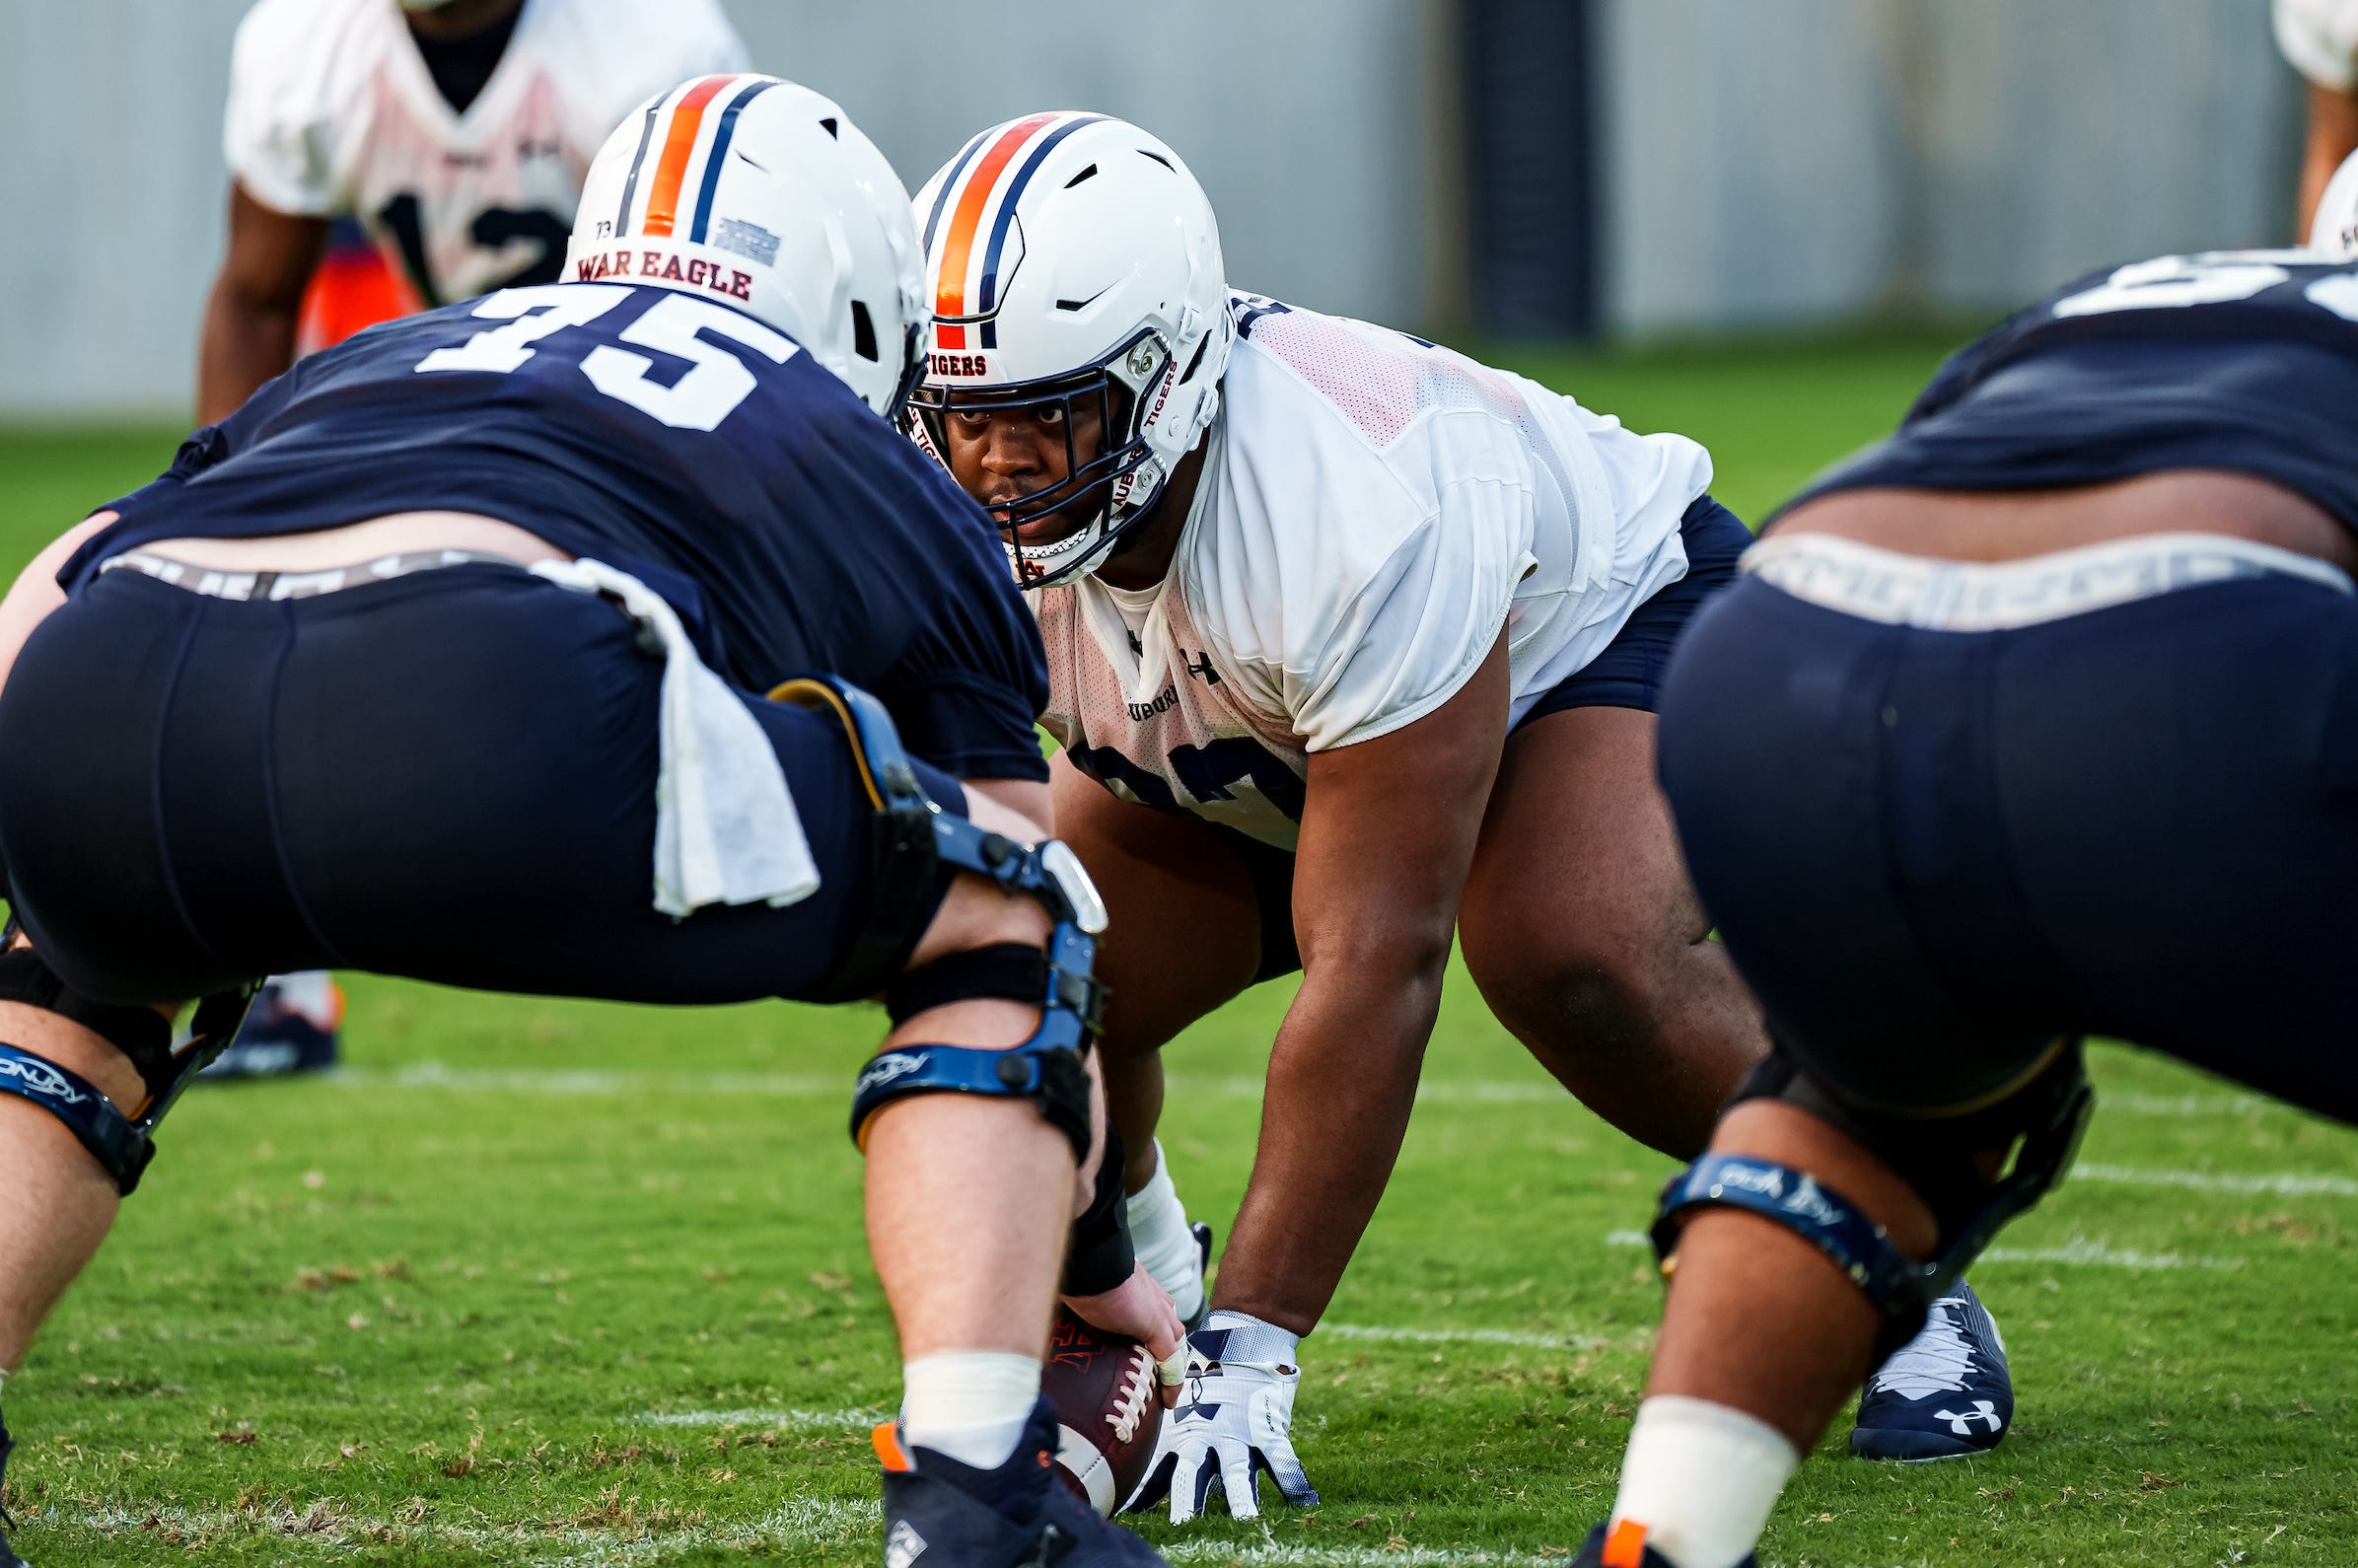 Aubserver Mailbag 121: Just how big is Auburn's roster renovation project?